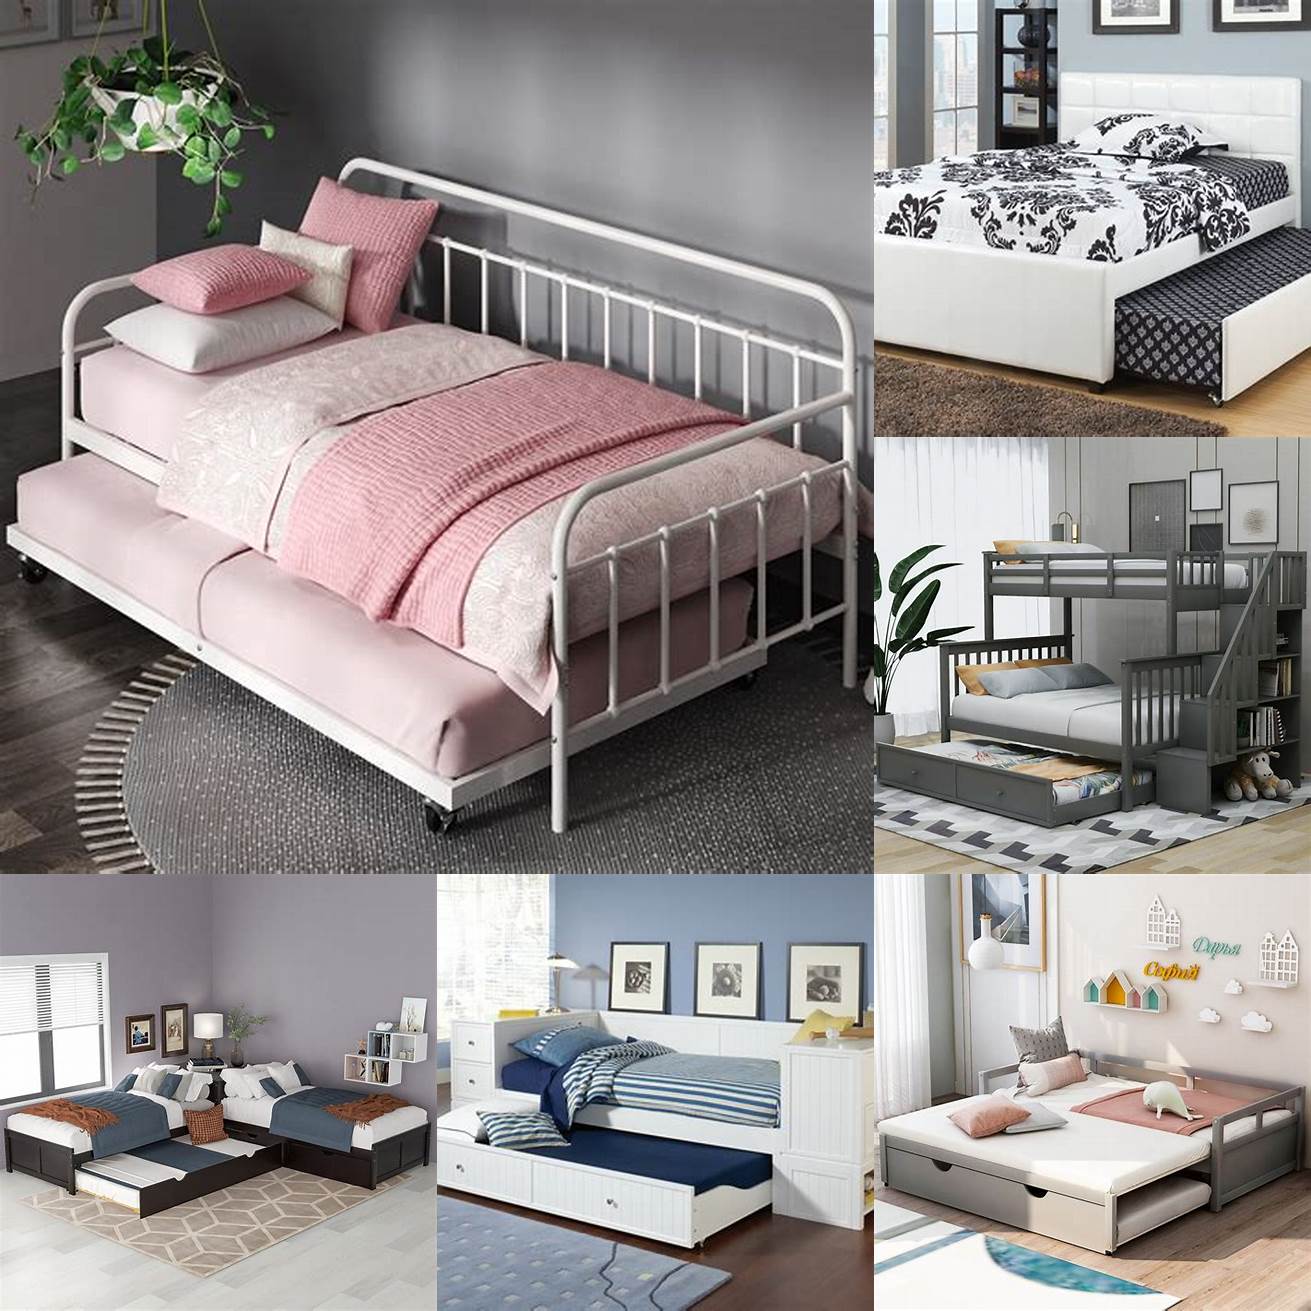 Full-size twin beds with trundle are ideal for teenagers or adults who want a larger sleeping space